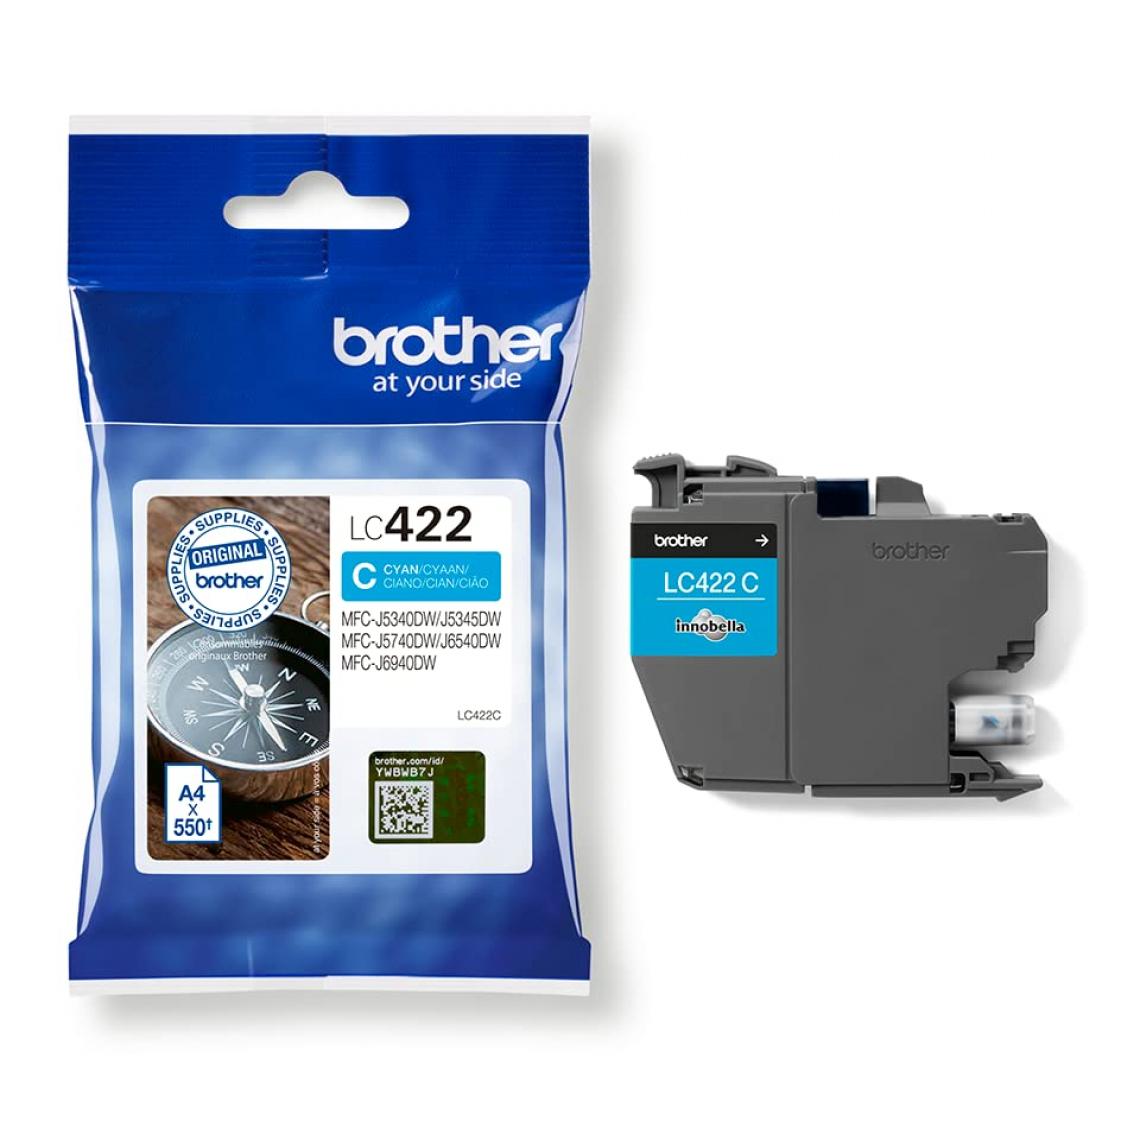 Brother - LC422C Ink For BH19M/B LC422C Ink Cartridge For BH19M/B Compatible with MFC-J5340DW MFC-J5740DW MFC-J6540DW MFC-J6940DW 550 pages - Cartouche d'encre